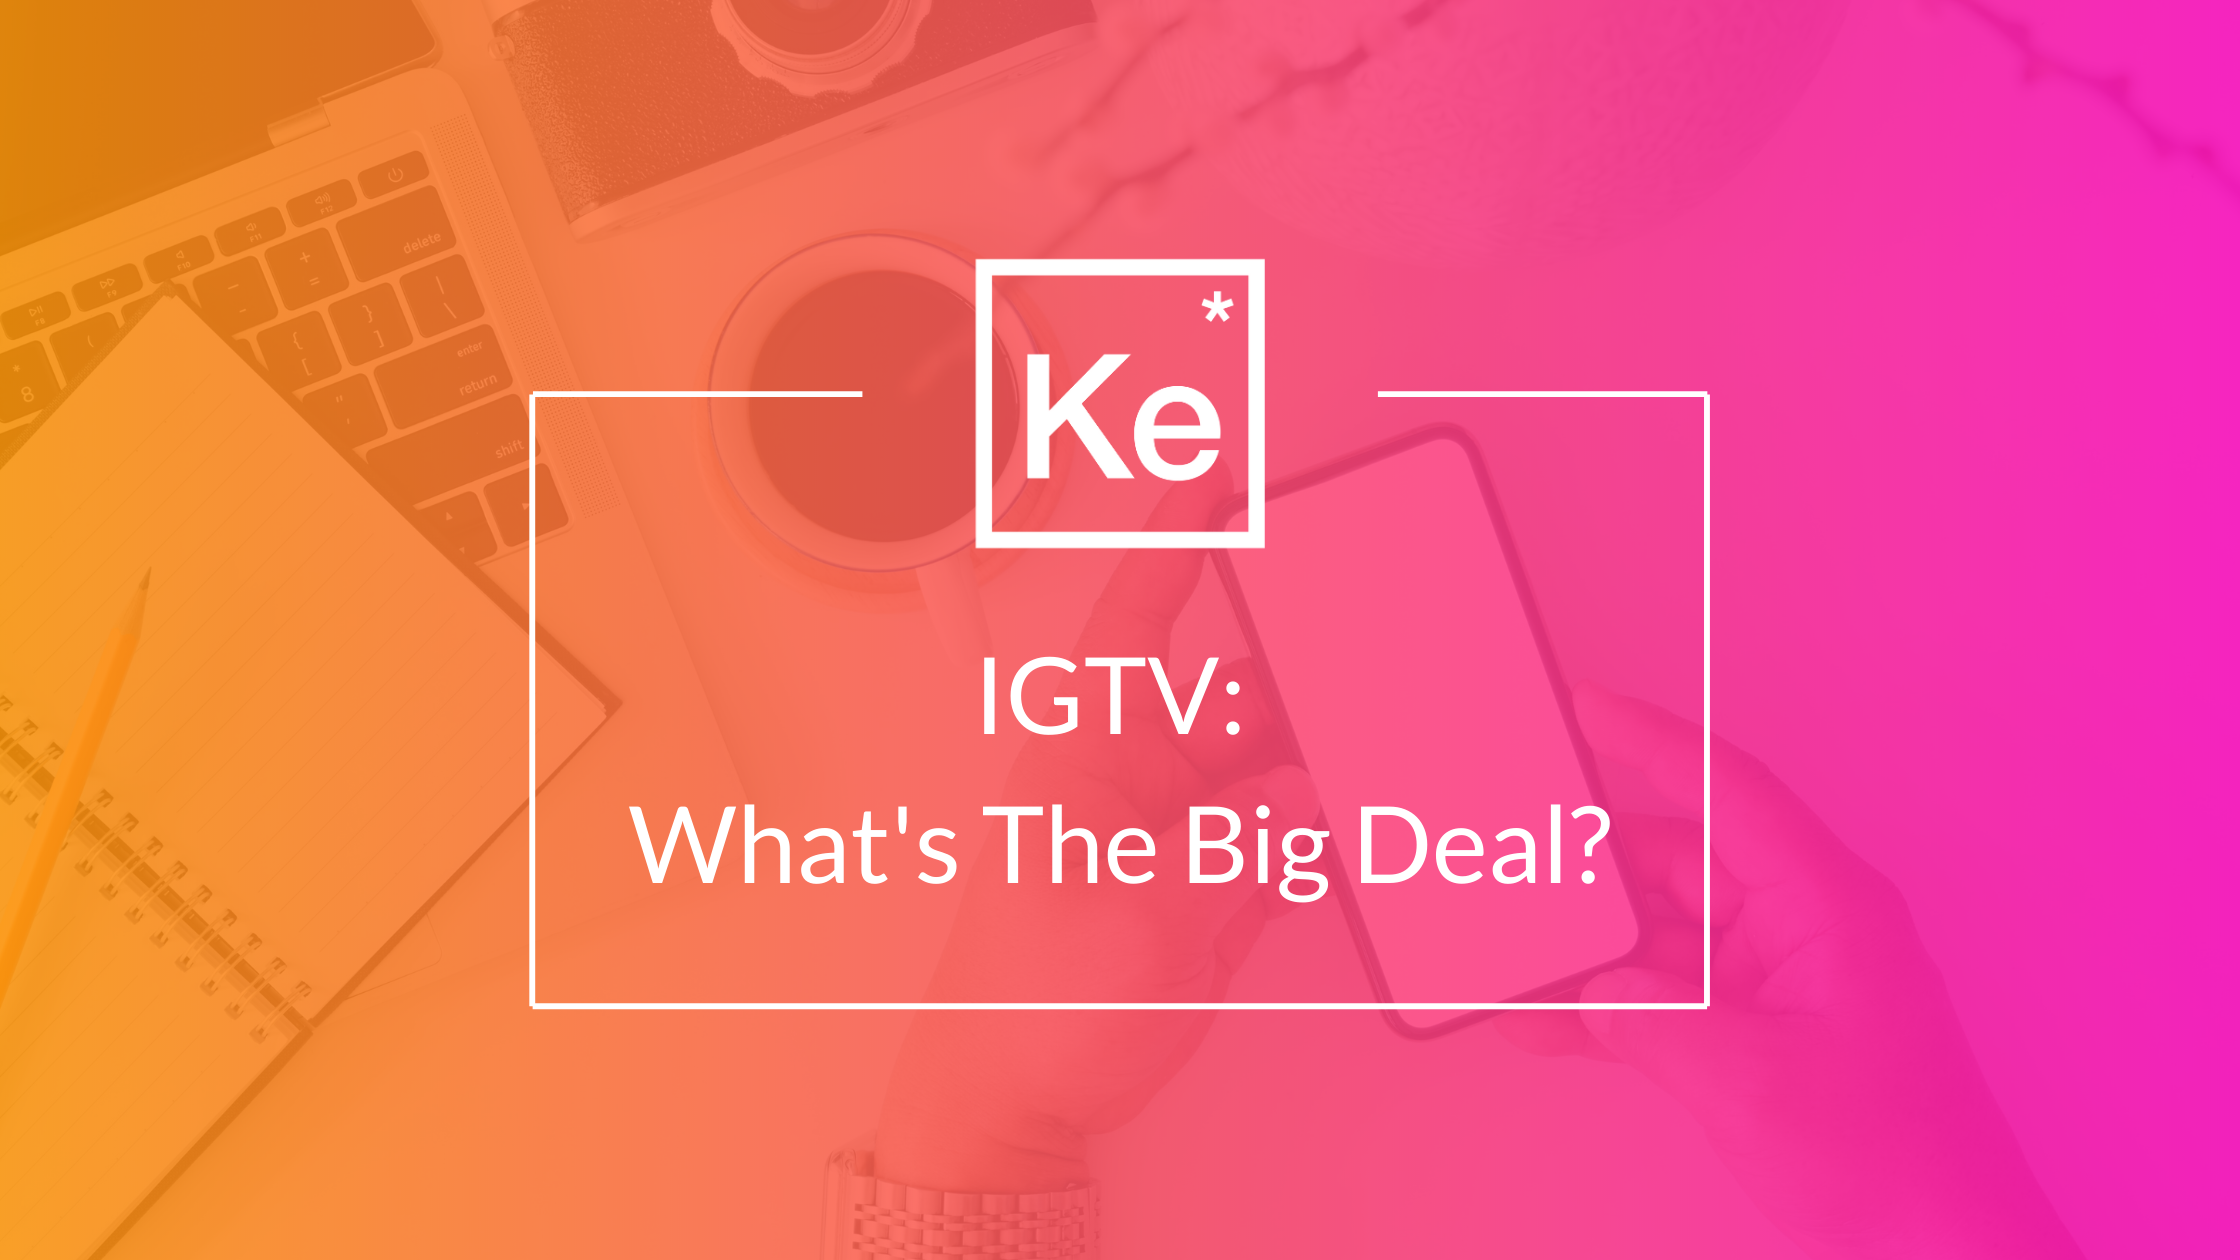 IGTV, What's the Big Deal